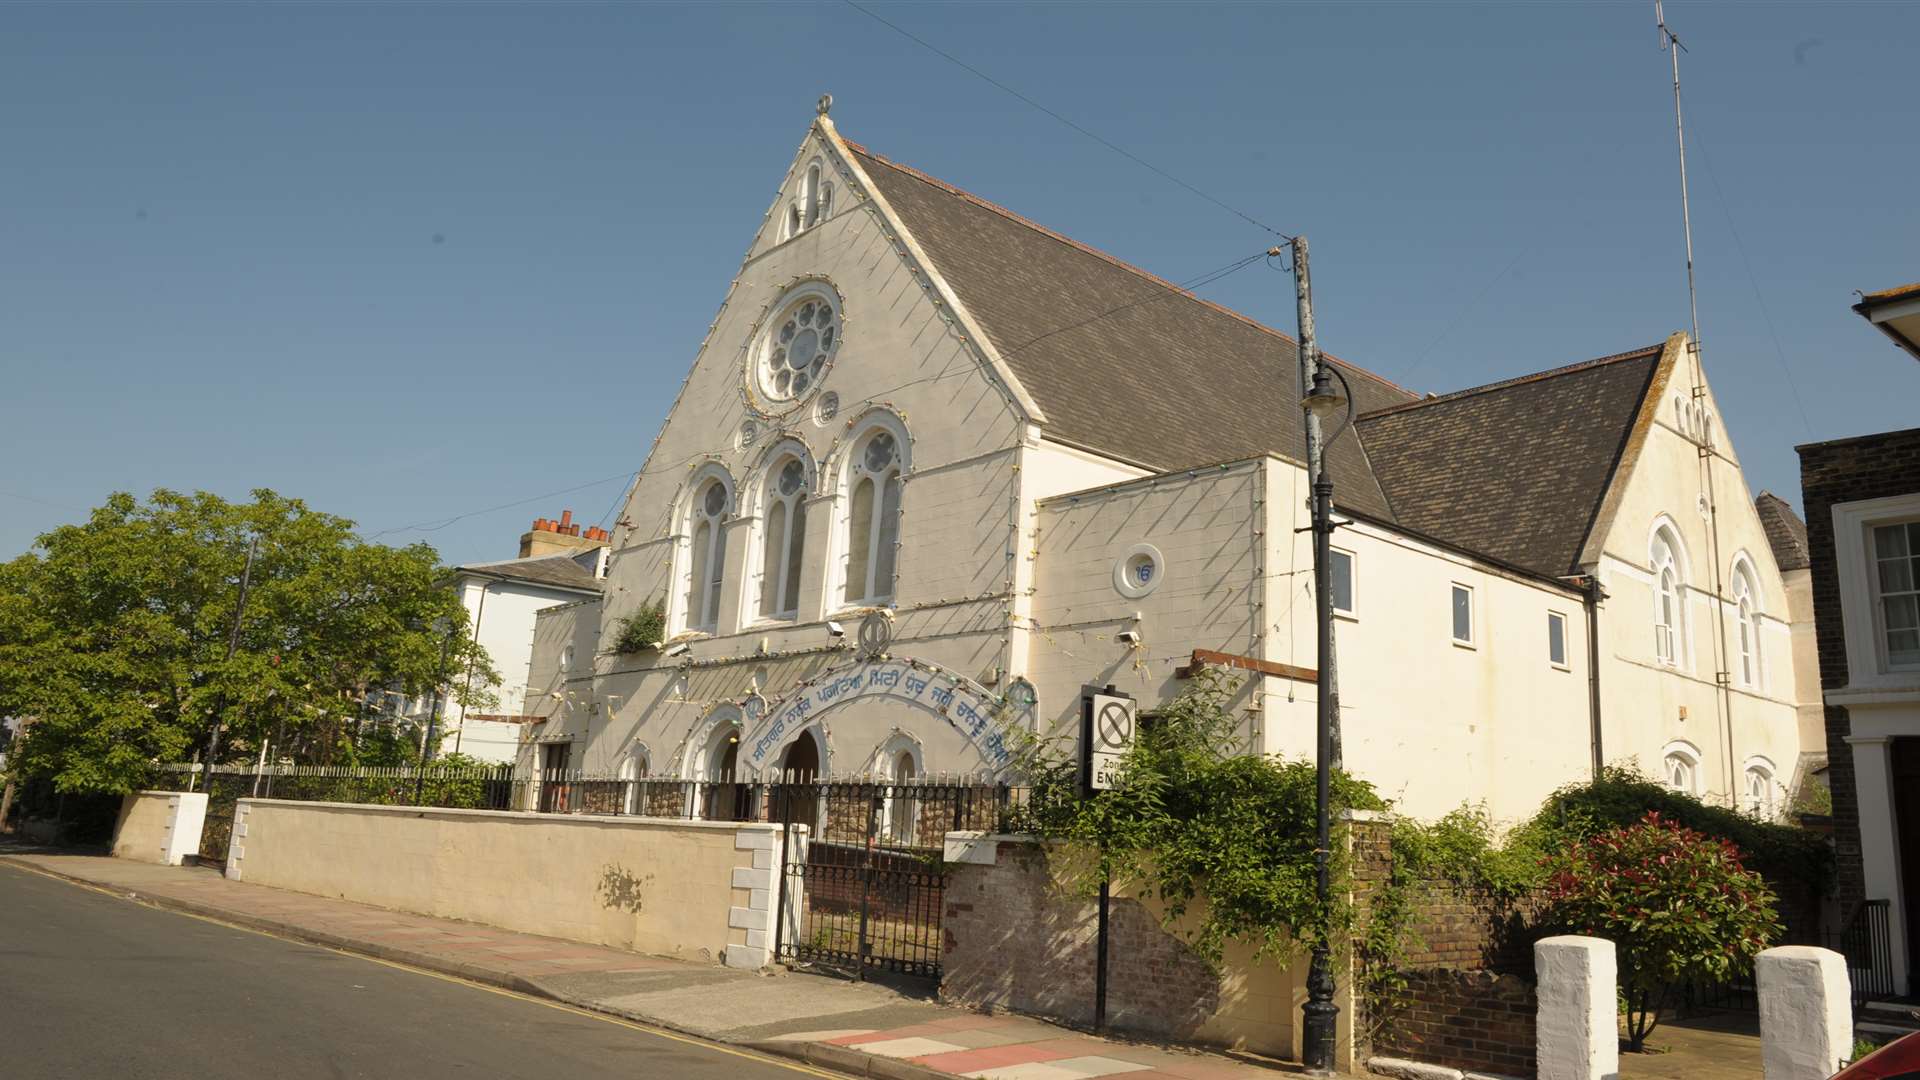 The former temple in Clarence Place, Gravesend.